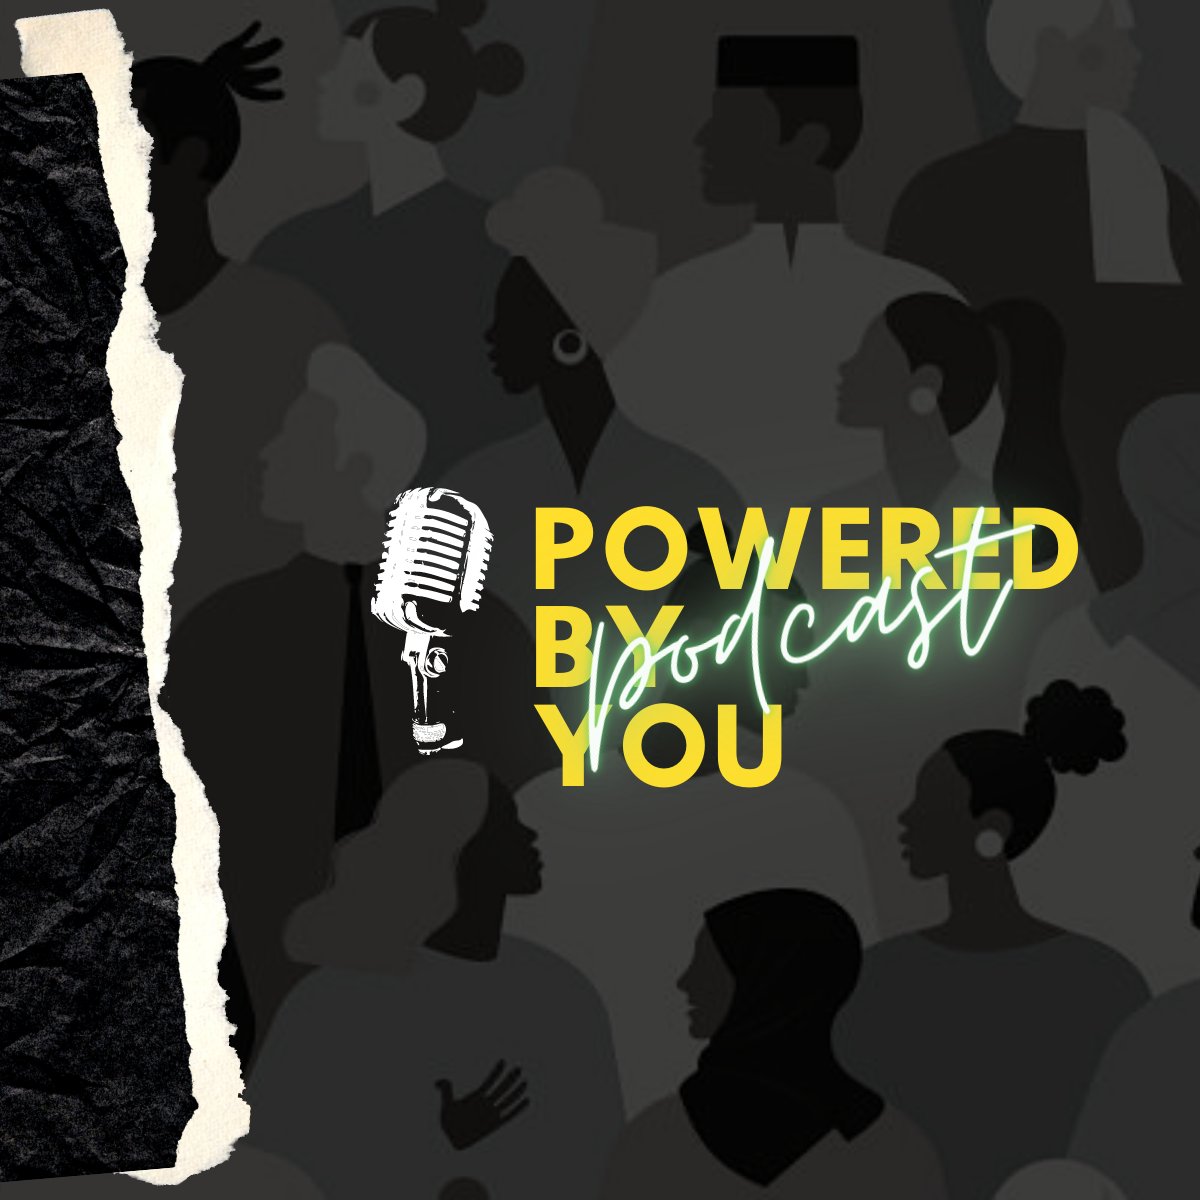 Series 3 Episode 3 of @rbkc Powered By You IS OUT now! This episode delves into the complex relationship between violence affecting youth and the stereotypes associated with clothing ow.ly/2qwA50RGQu1 @morleycollege